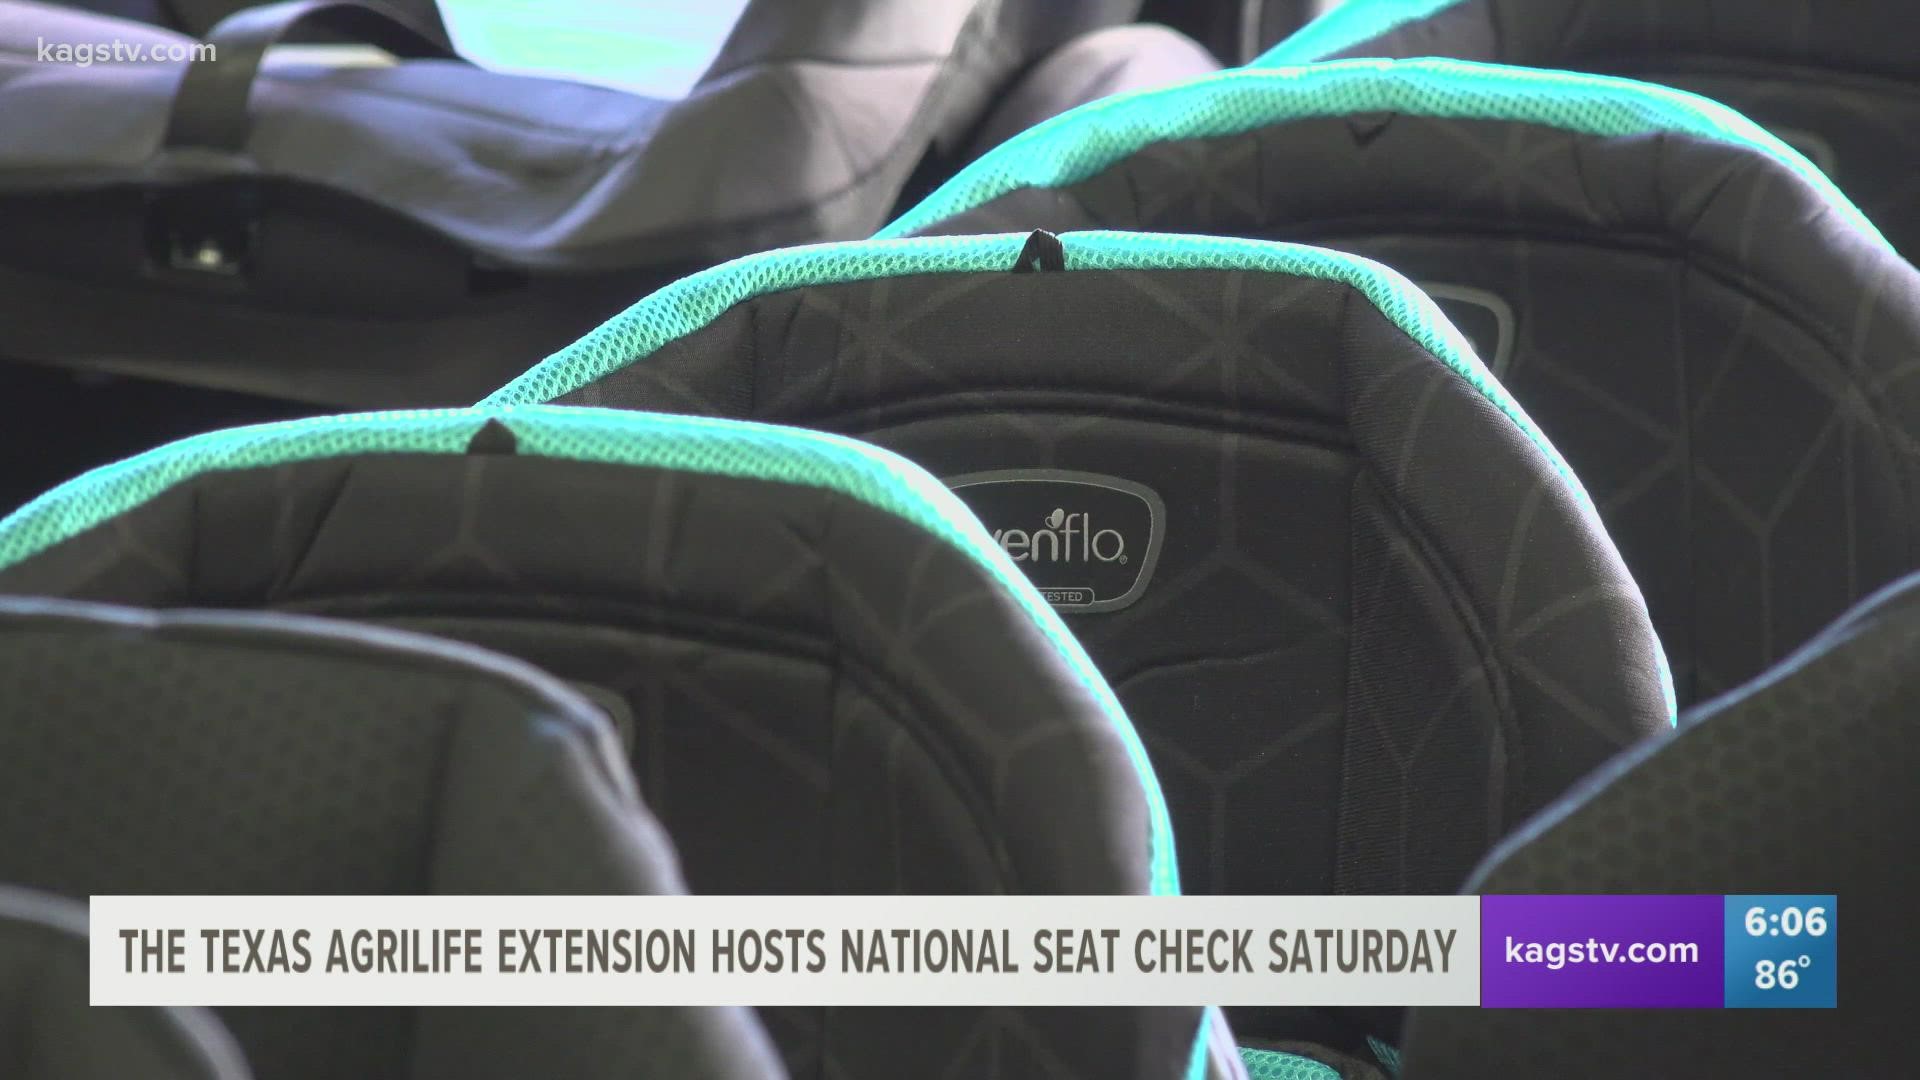 The Passenger and Community Safety program wants to educate parents on car seat safety at their National Seat Check Saturday event.